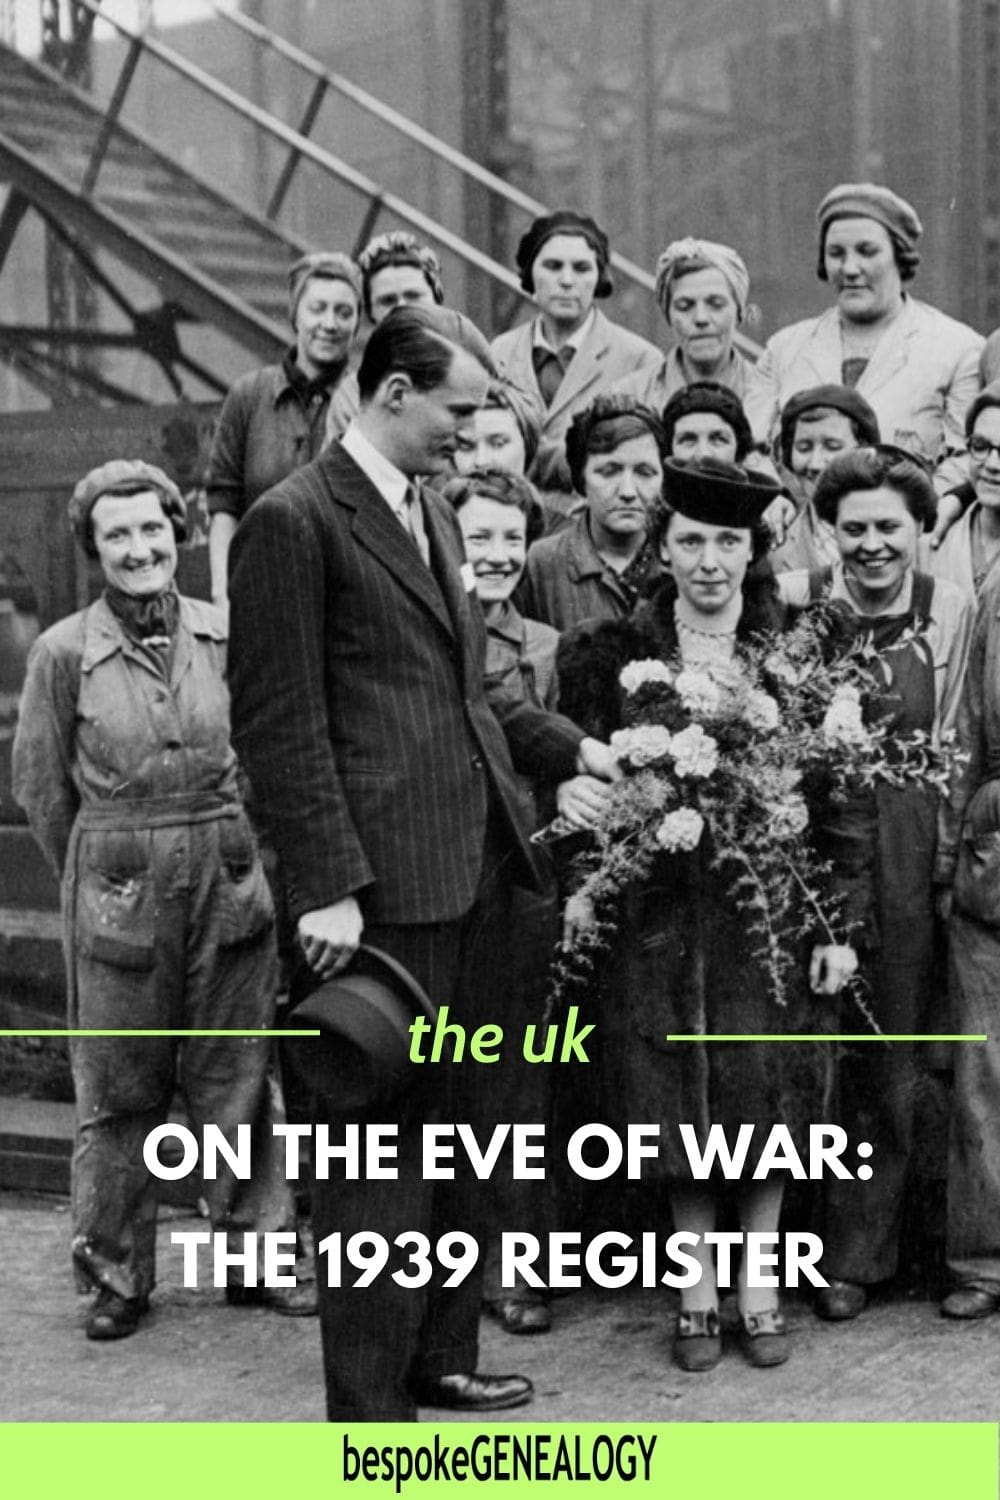 Pinterest pin. The UK on the eve if war. The 1939 Register. Photo from 1939 showing group of women in overalls behind a man in a suit who has just given a bunch of flowers to a smartly dressed woman.